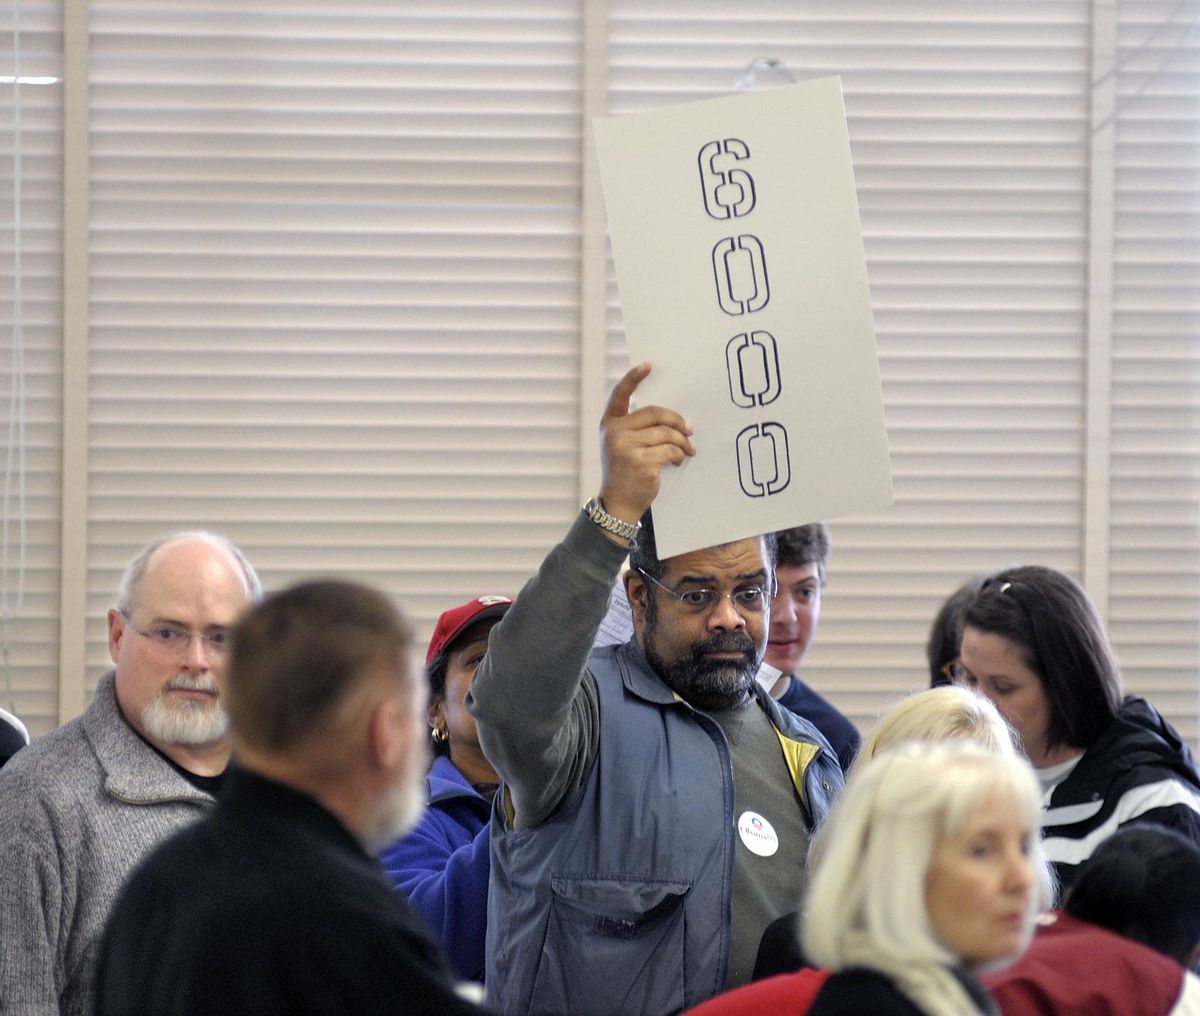 Jeff Johnston holds up a precinct sign as he attends the Democratic caucus sessions at Salk Middle School in Spokane on February 9, 2008. (Christopher Anderson / The Spokesman-Review)